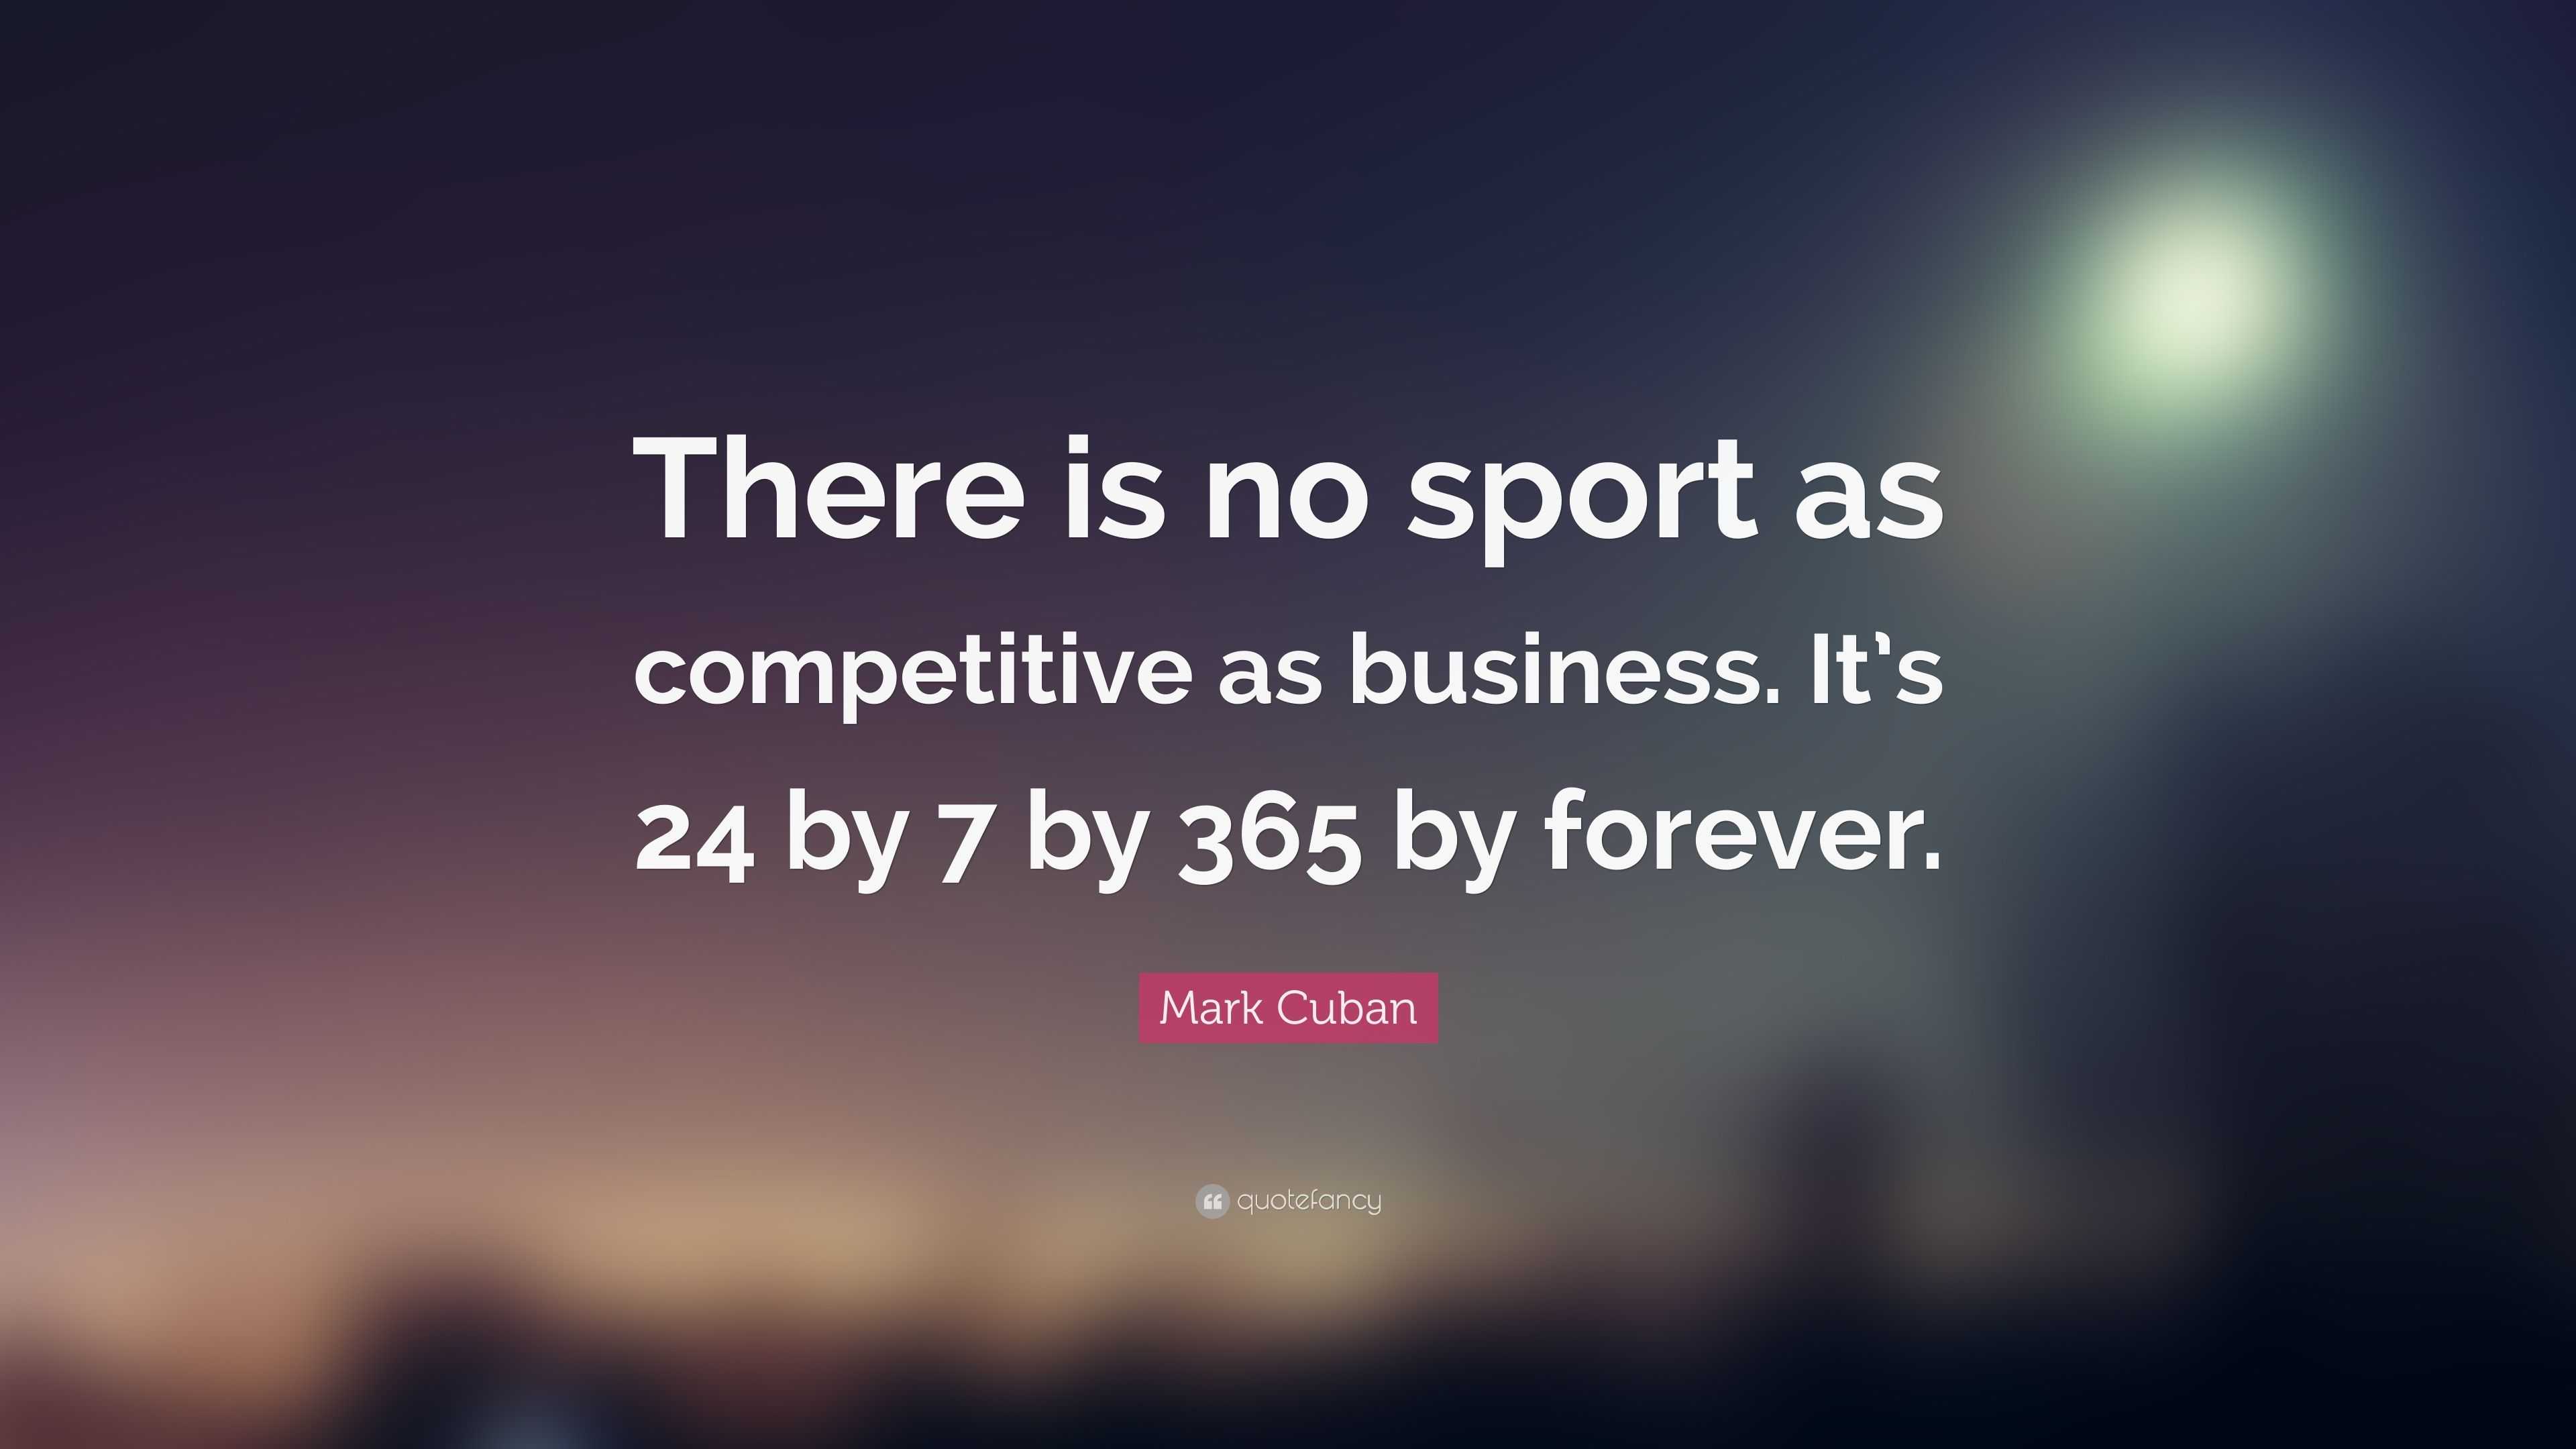 Mark Cuban Quote There Is No Sport As Competitive As Business It S 24 By 7 By